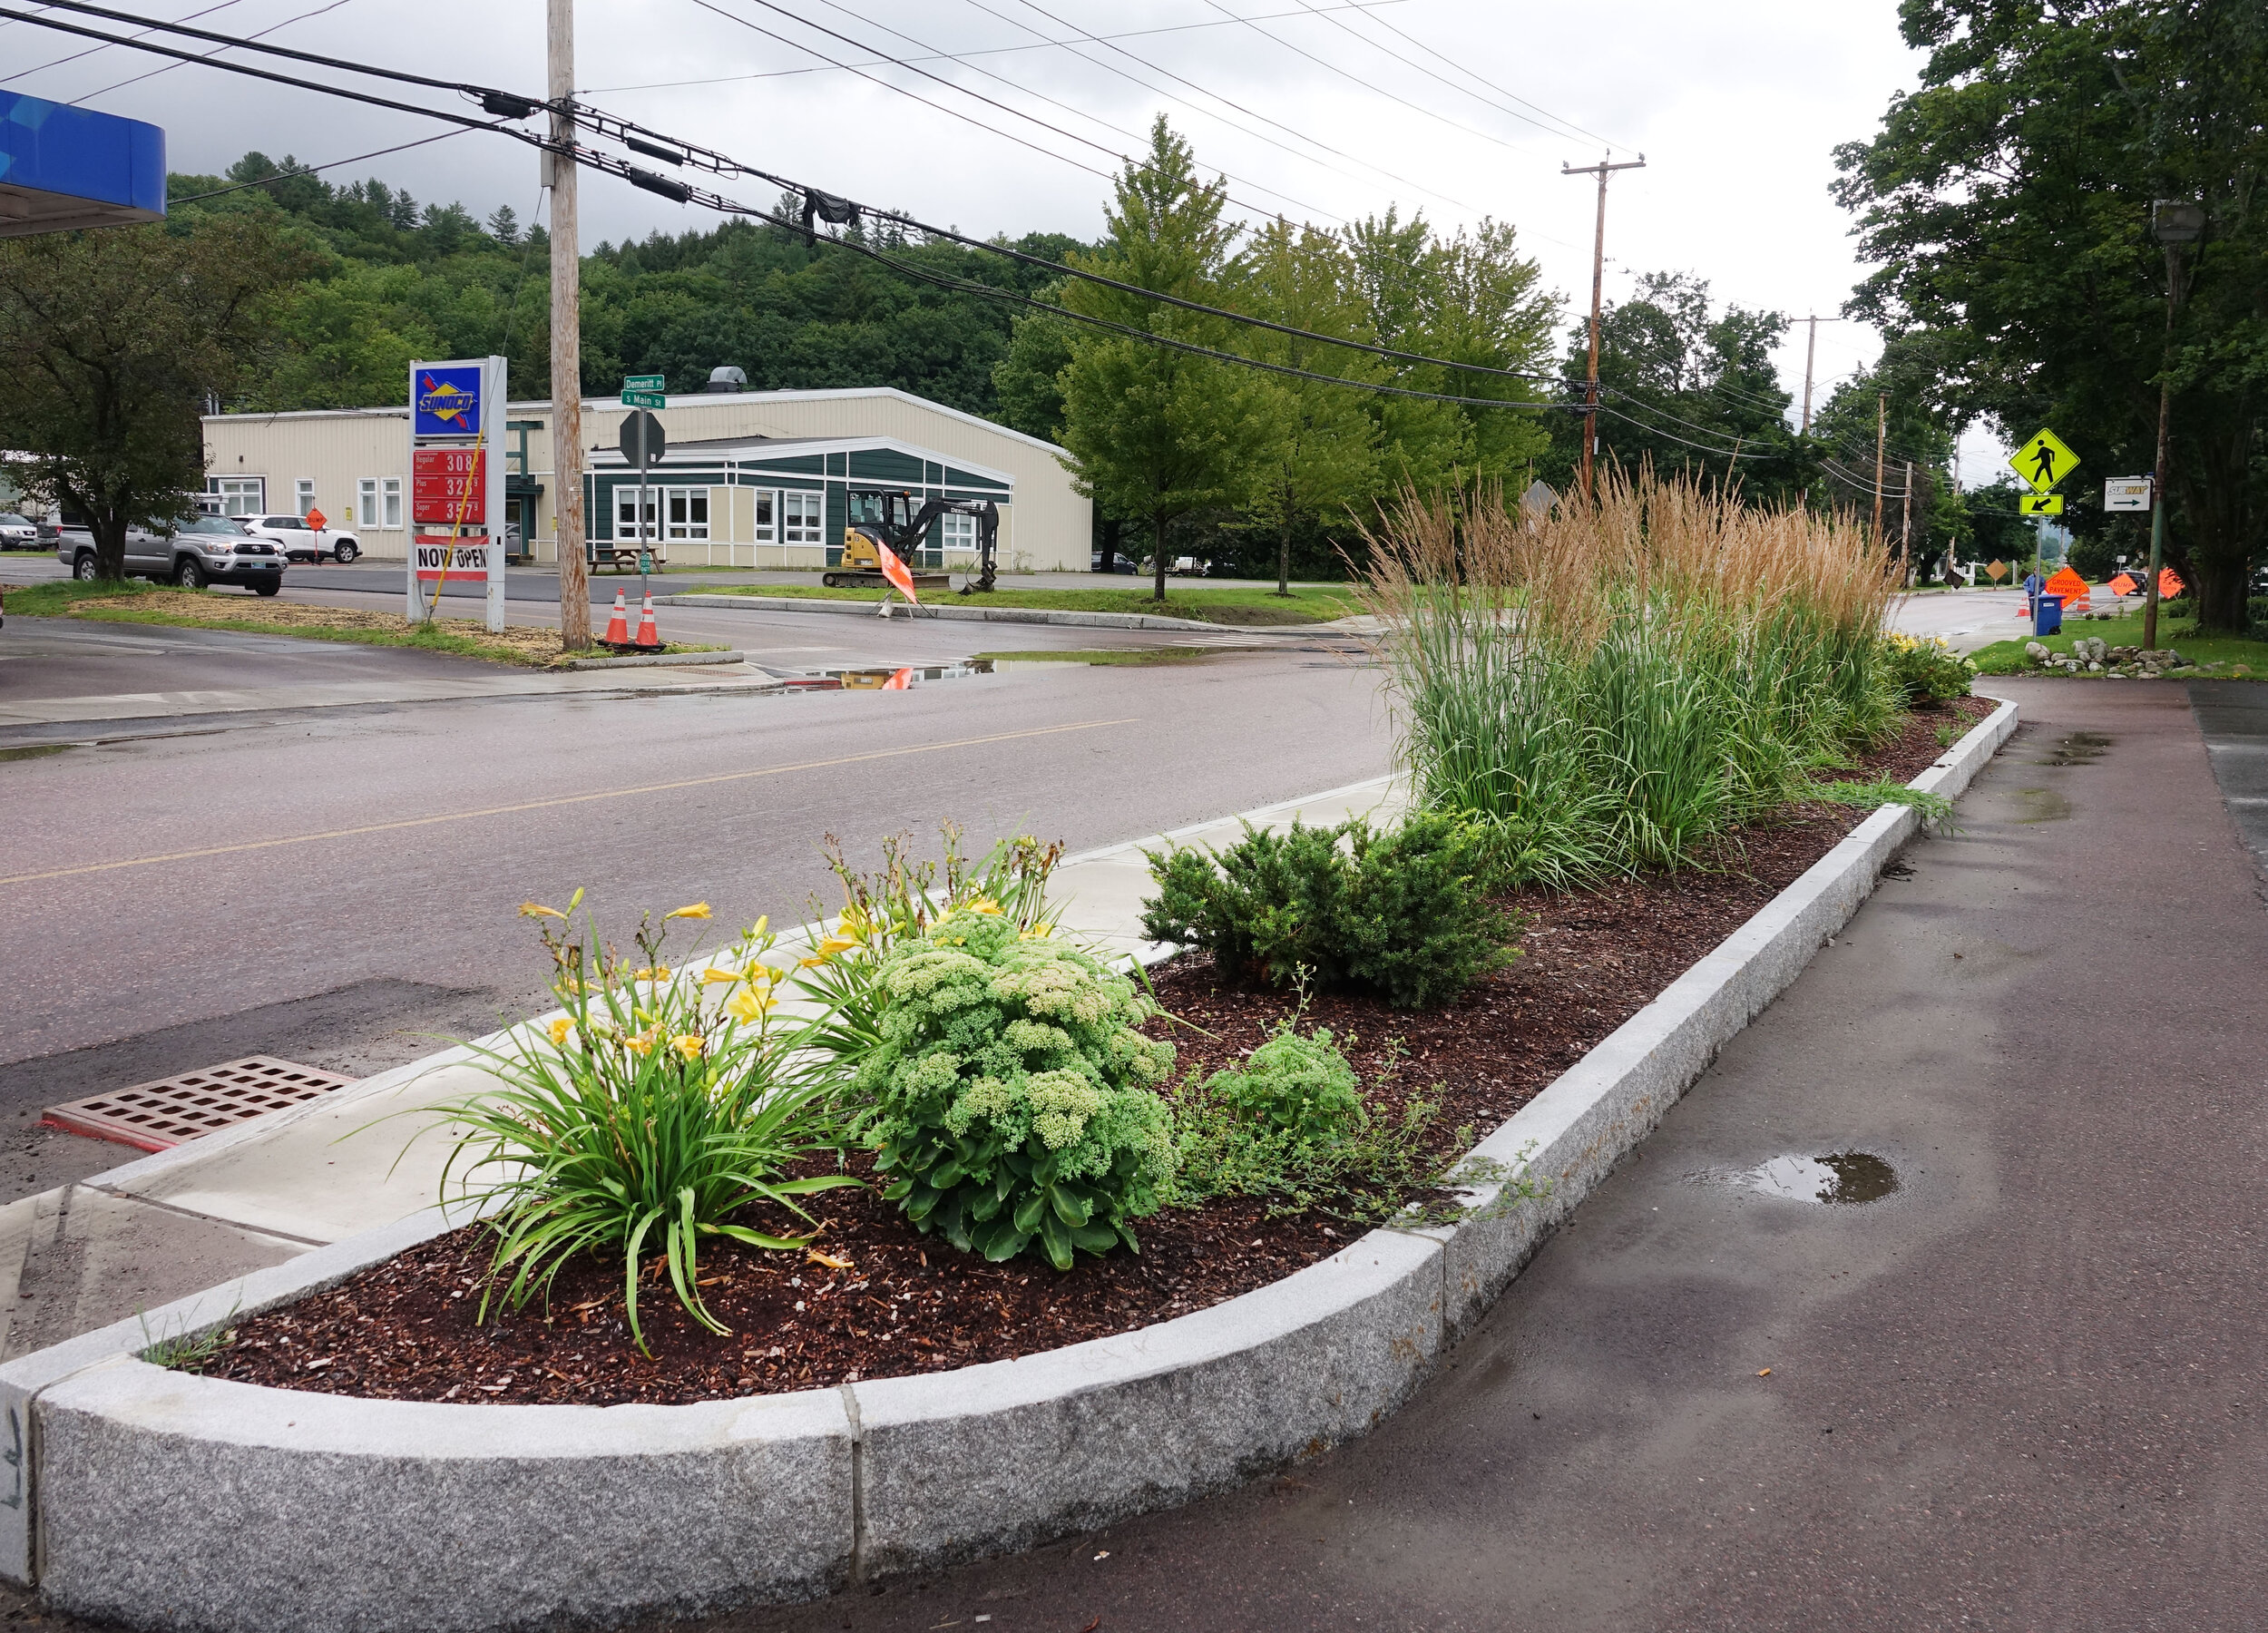   New areas for plantings are lined with granite curbing along various spots on Main Street. Photo by Gordon Miller  